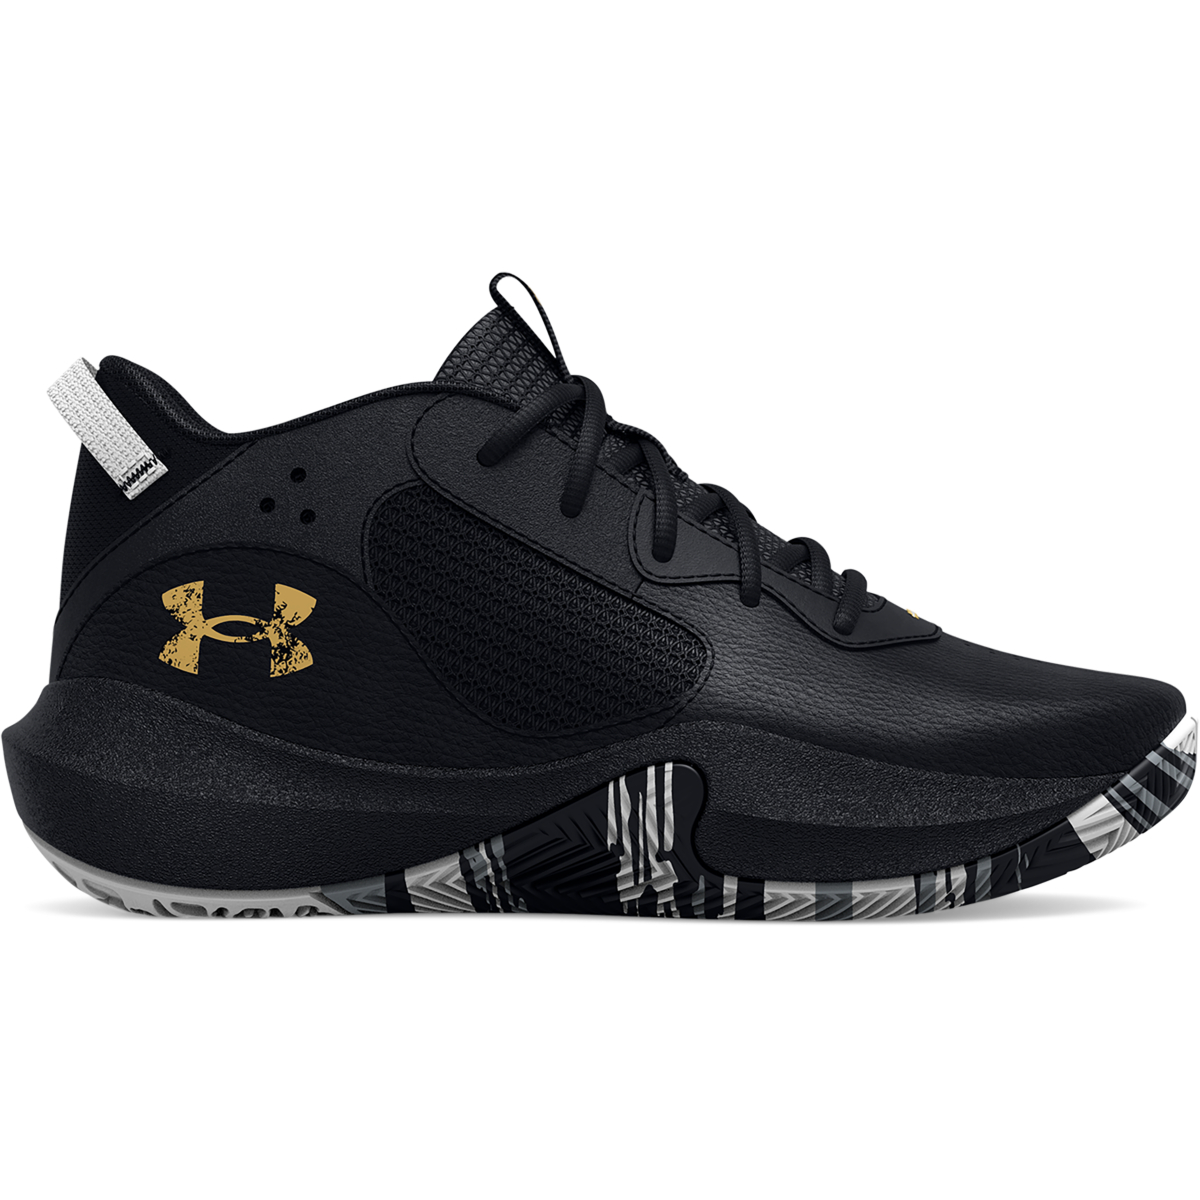 Under Armour - 3025618 UA PS LOCKDOWN 6 - 003/7171 Παιδικά > Παπούτσια > Αθλητικά > Παπούτσι Low Cut